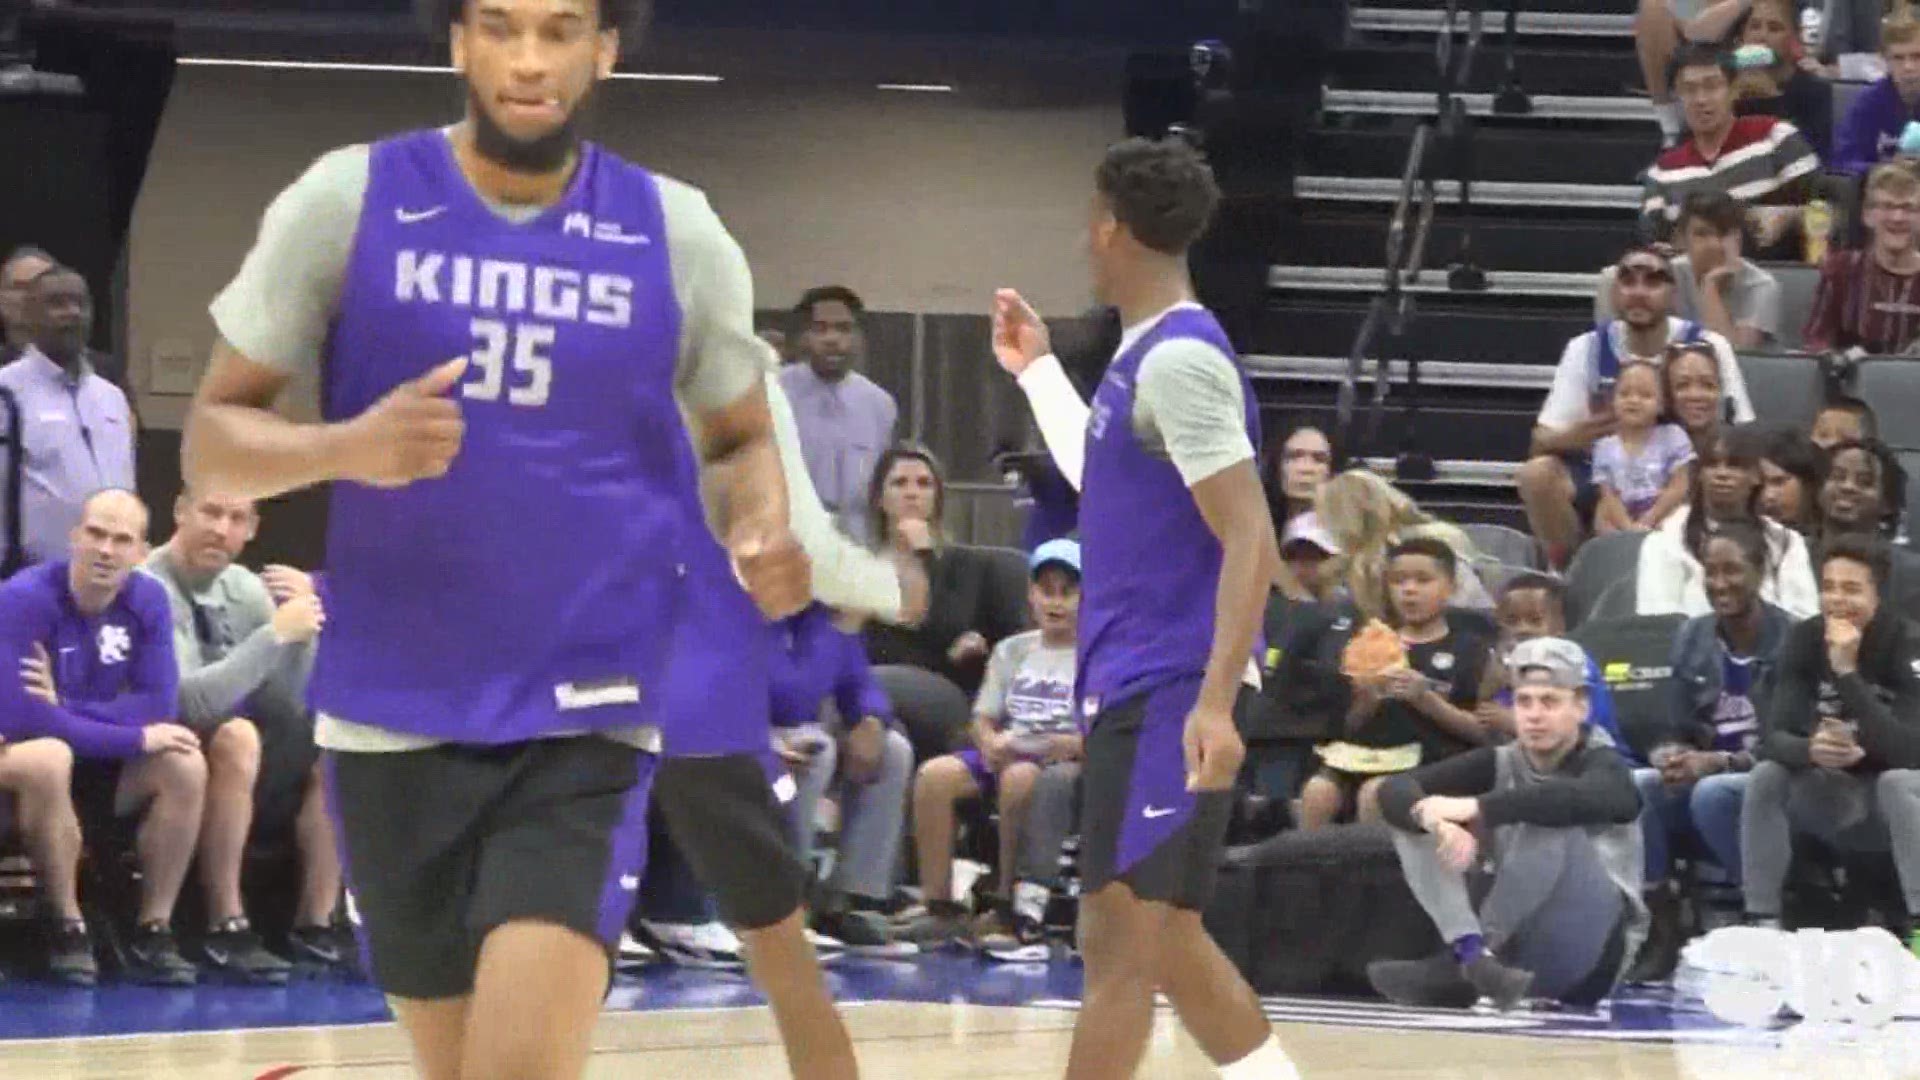 Buddy Hield threw down a dunk and send a playful message to Sacramento Kings general manager Vlade Divac, who was seated courtside for the annual Fan Fest.